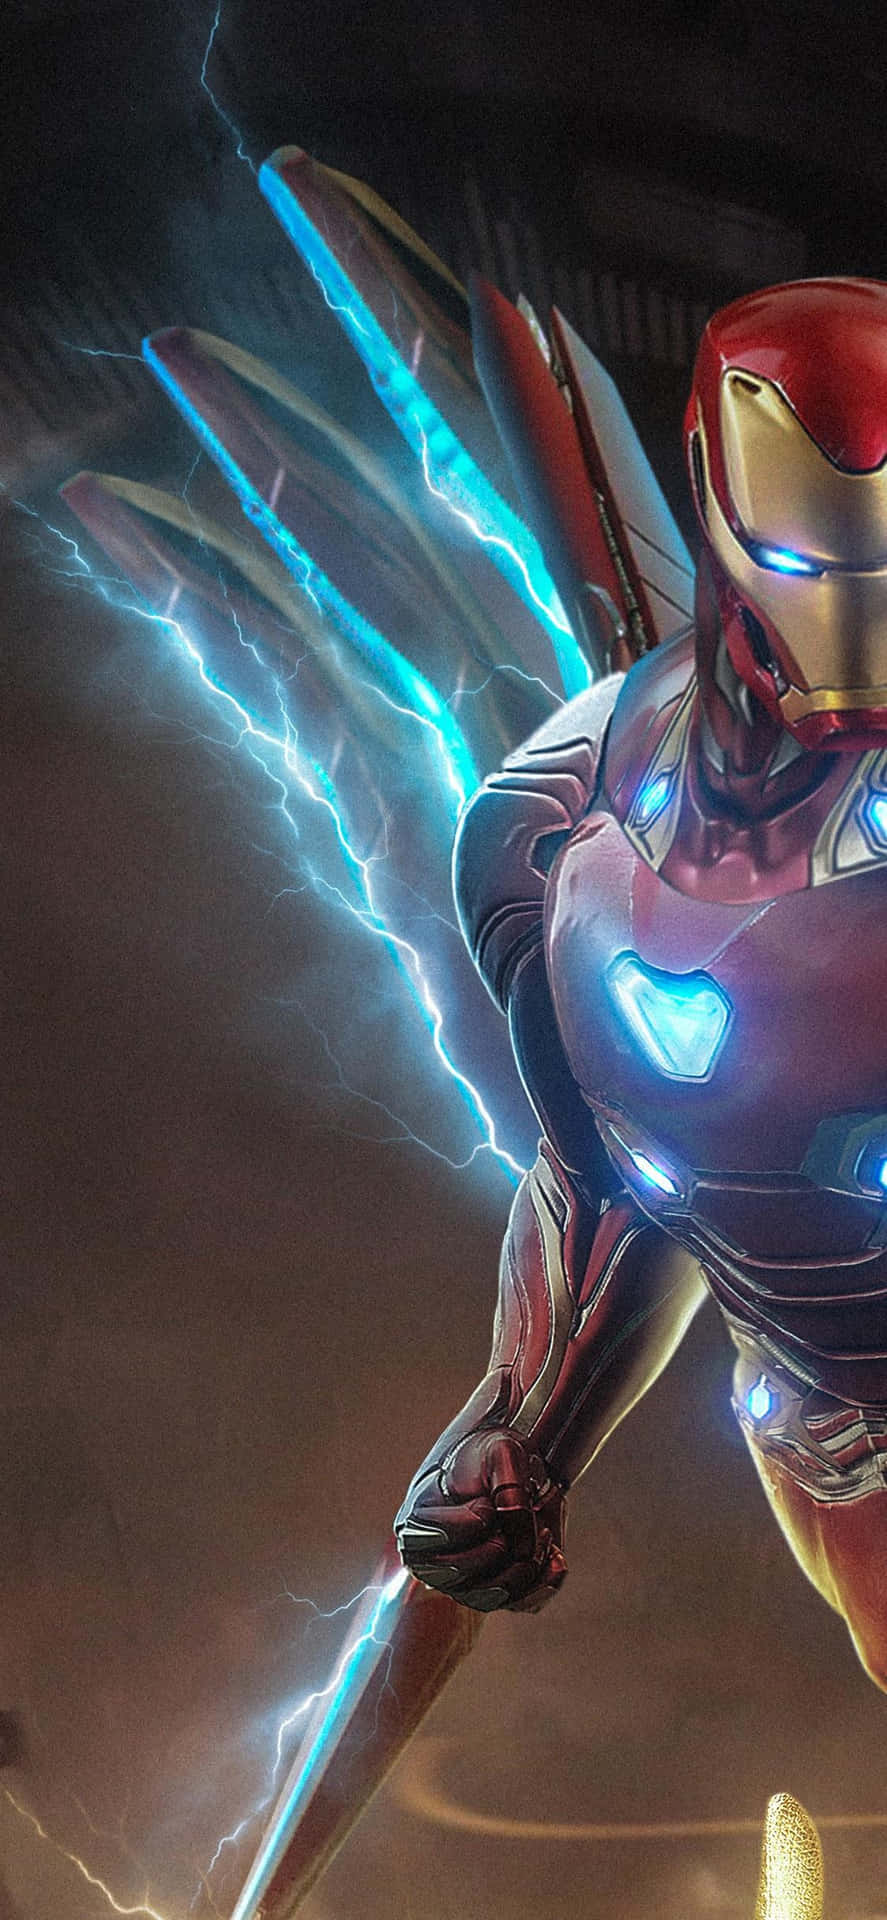 Get the sleek Iron Man look with the iPhone X Wallpaper